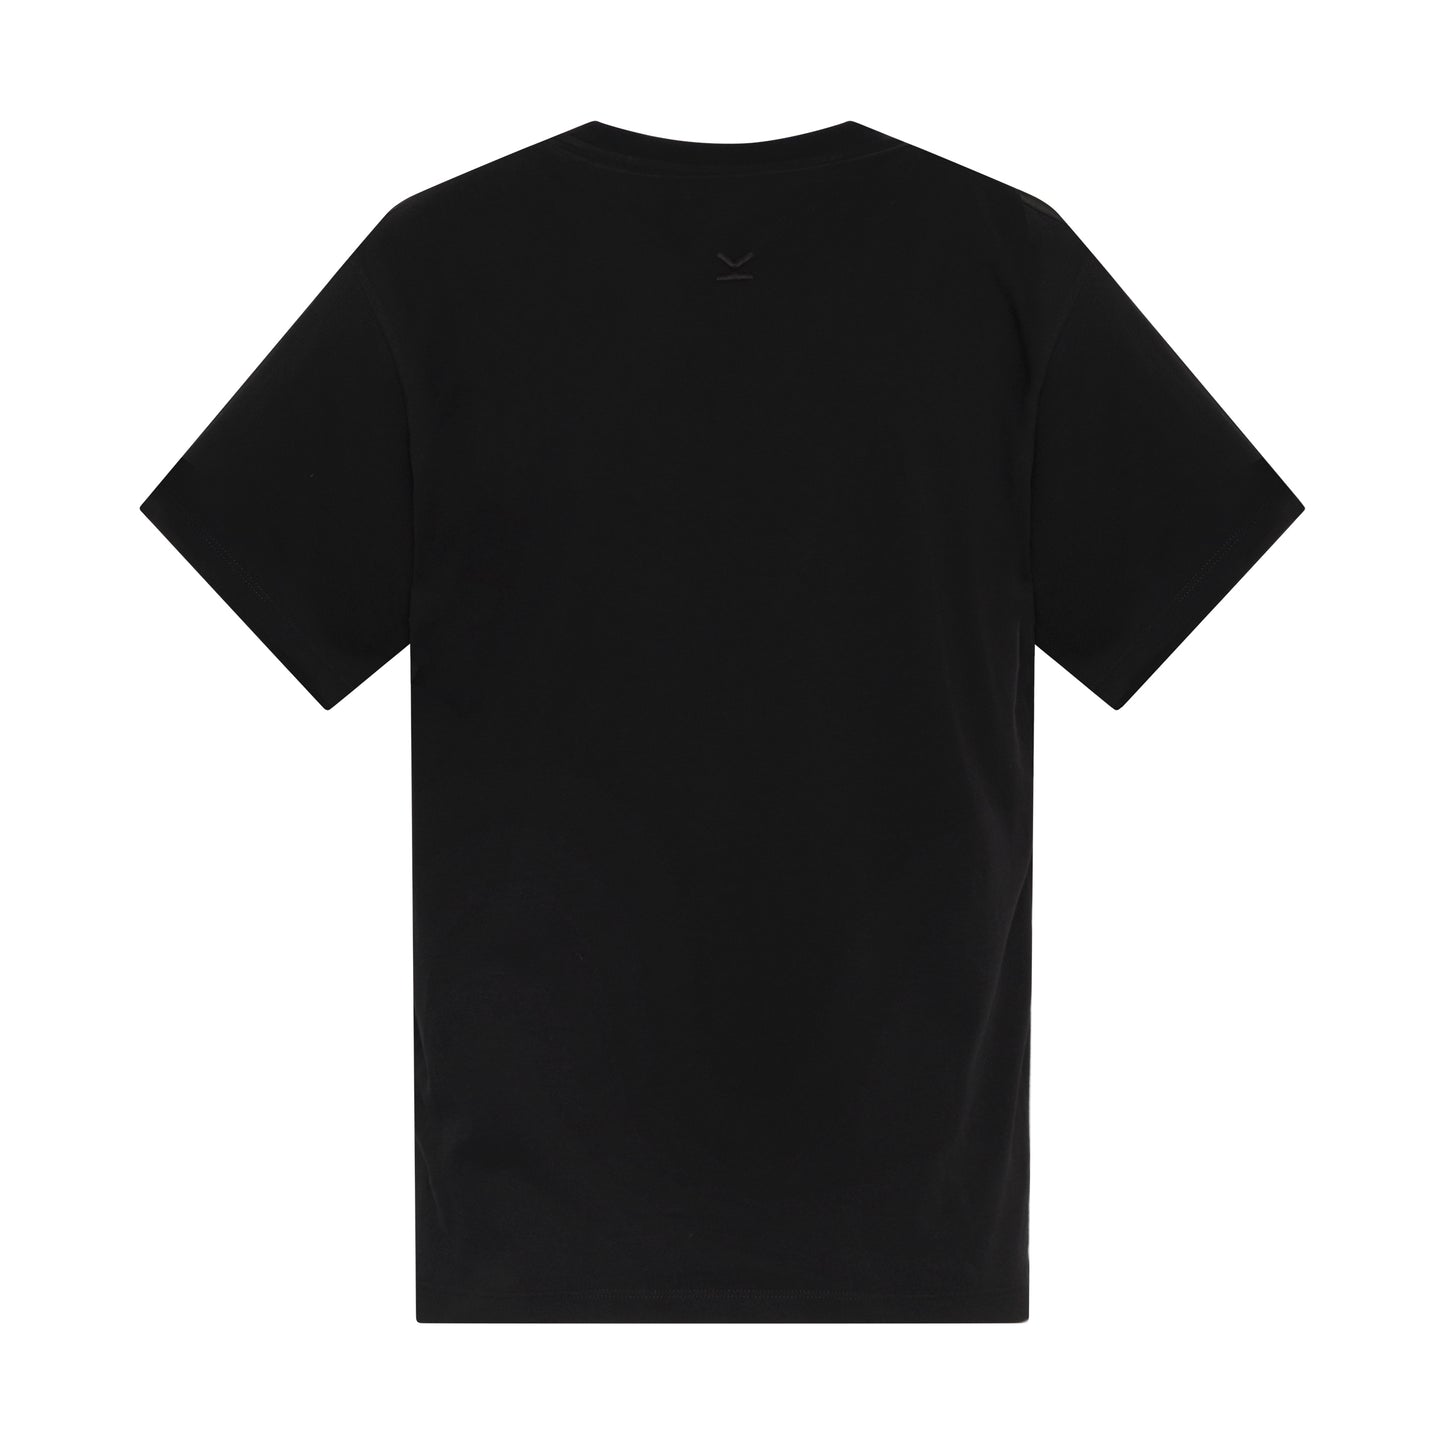 Classic Tiger Crest T-Shirt in Black